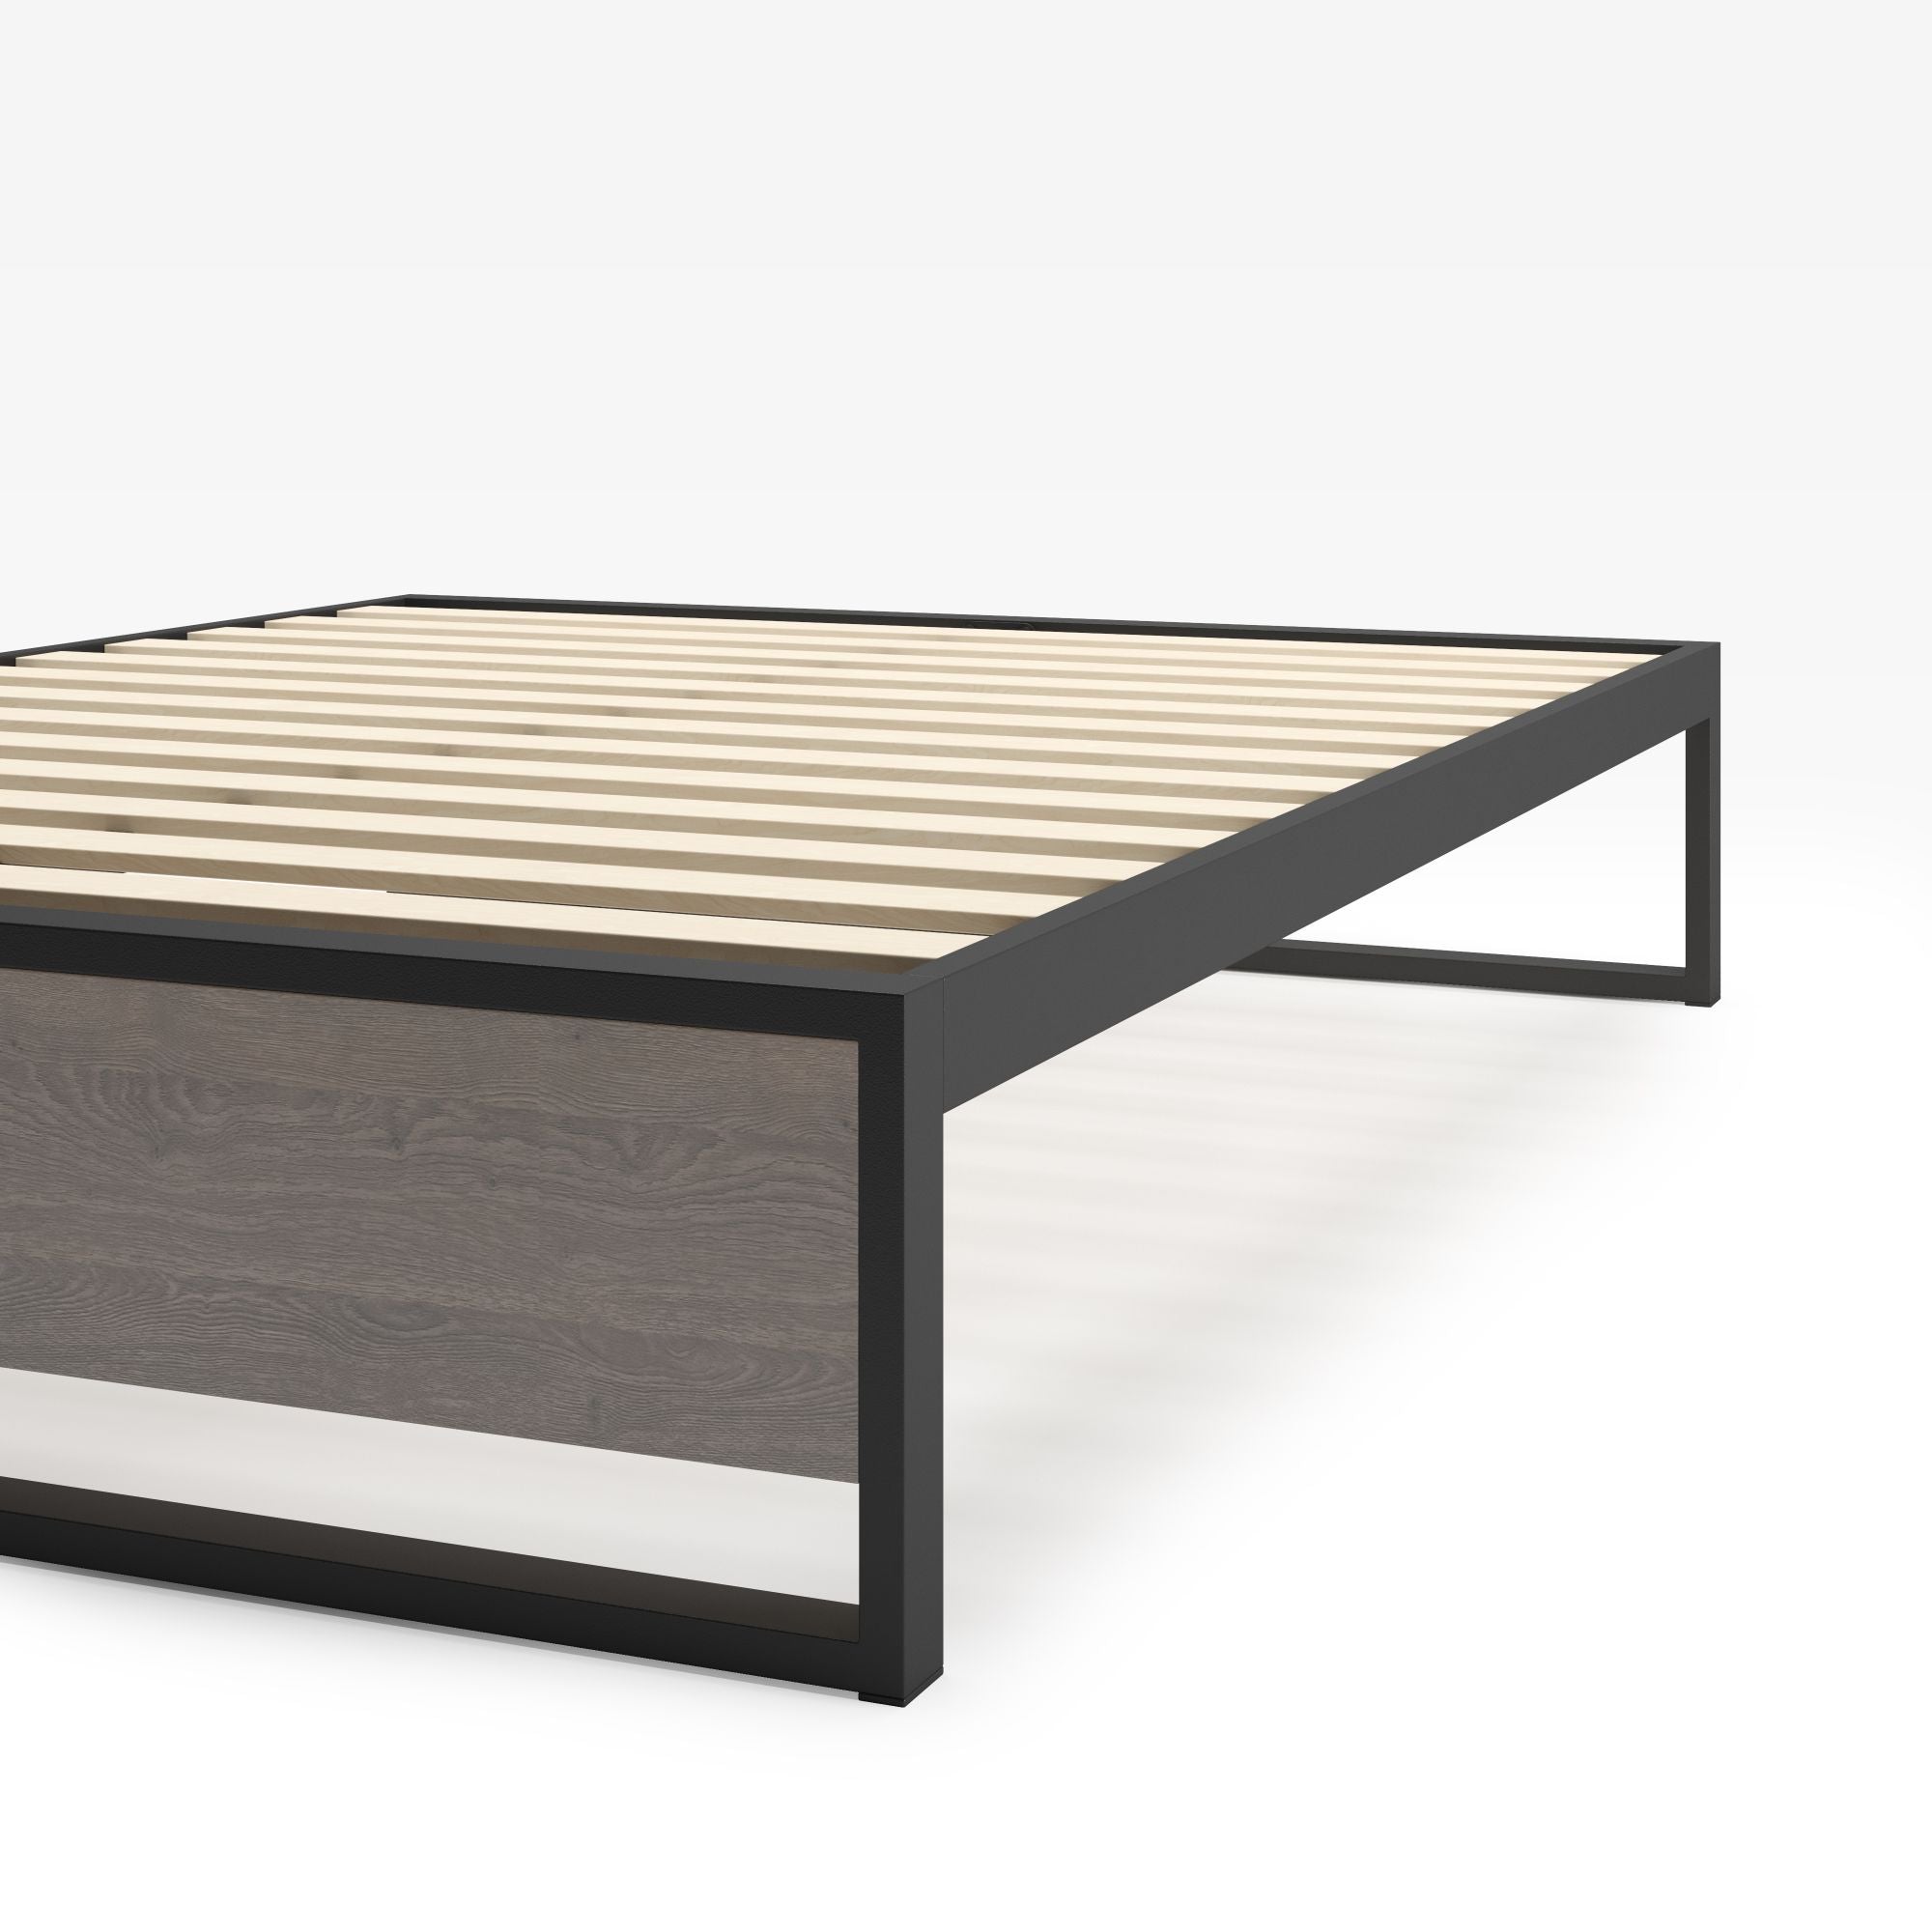 14 inch Suzanne Metal and Wood Platform Bed FrameDetail